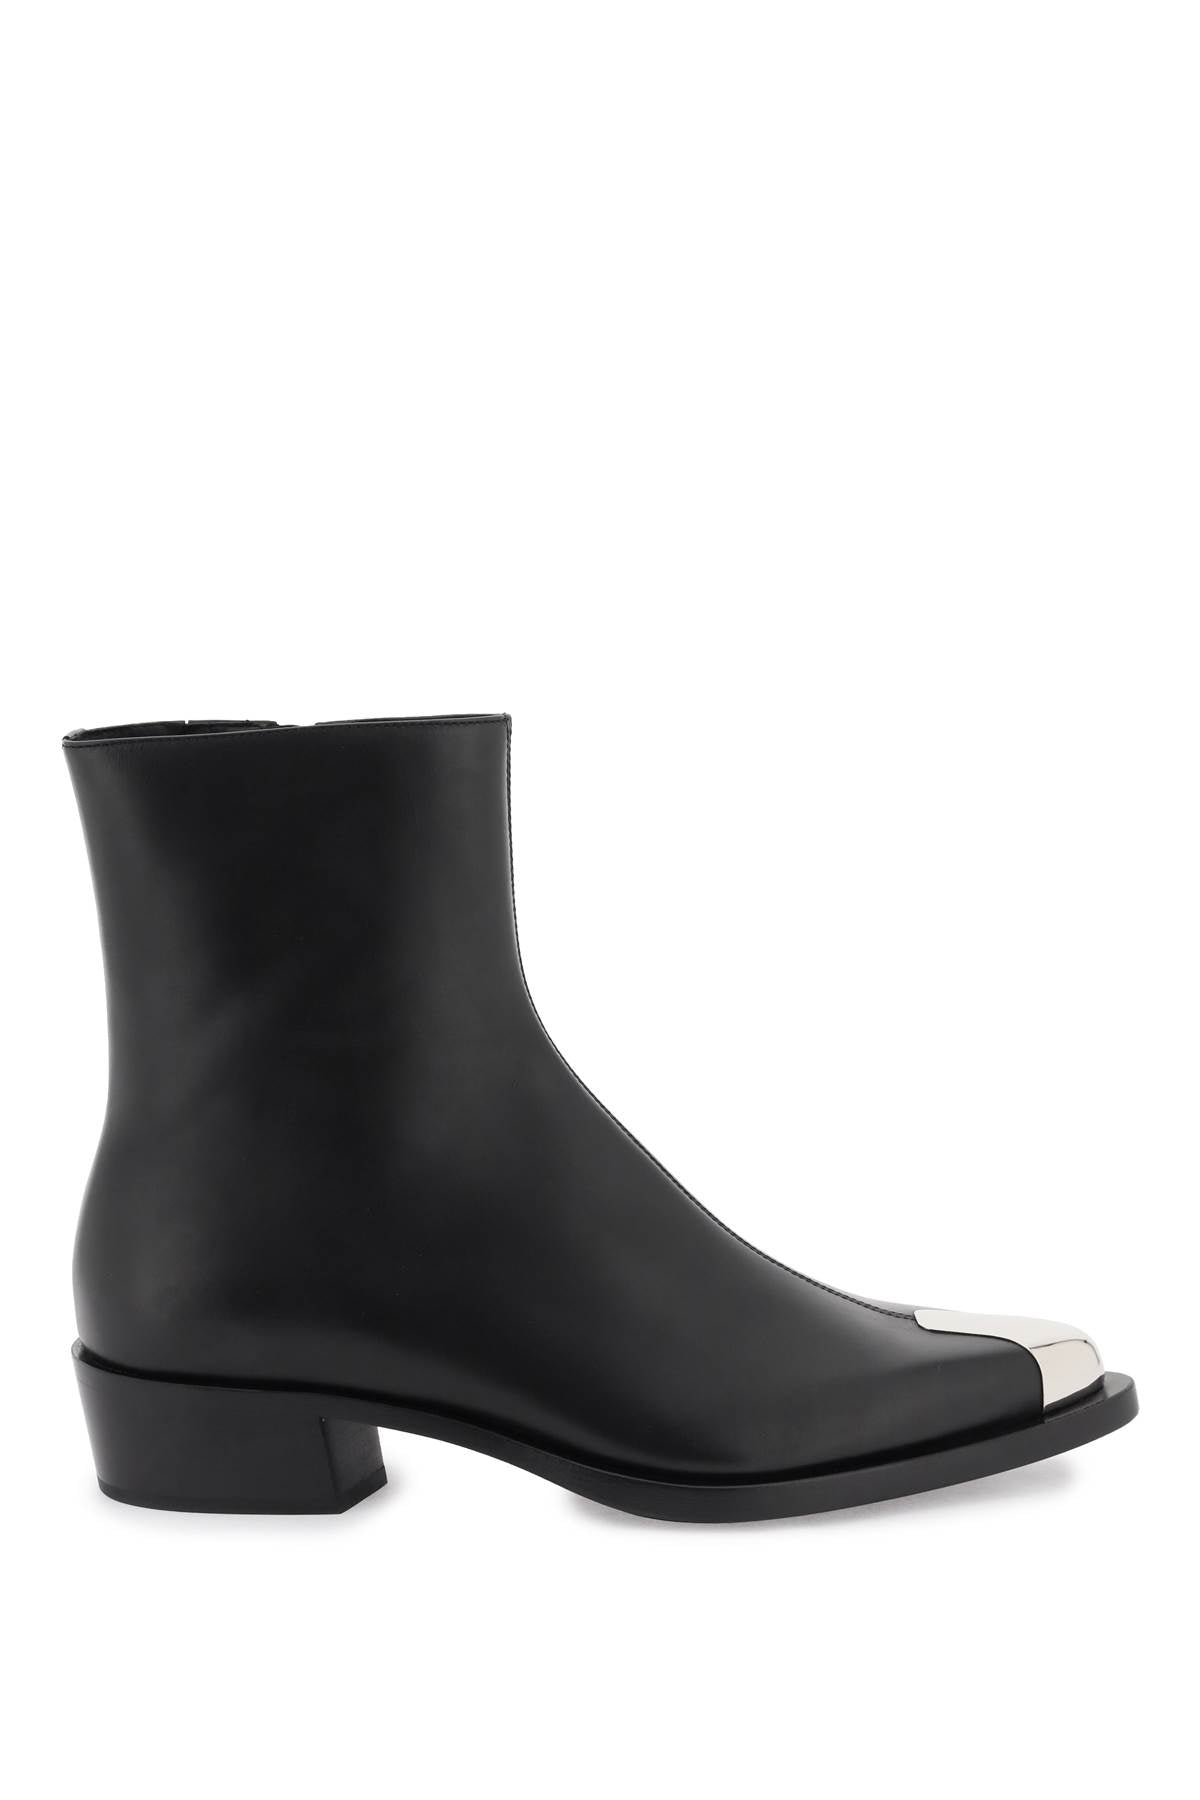 Alexander mcqueen leather punk ankle boots-0